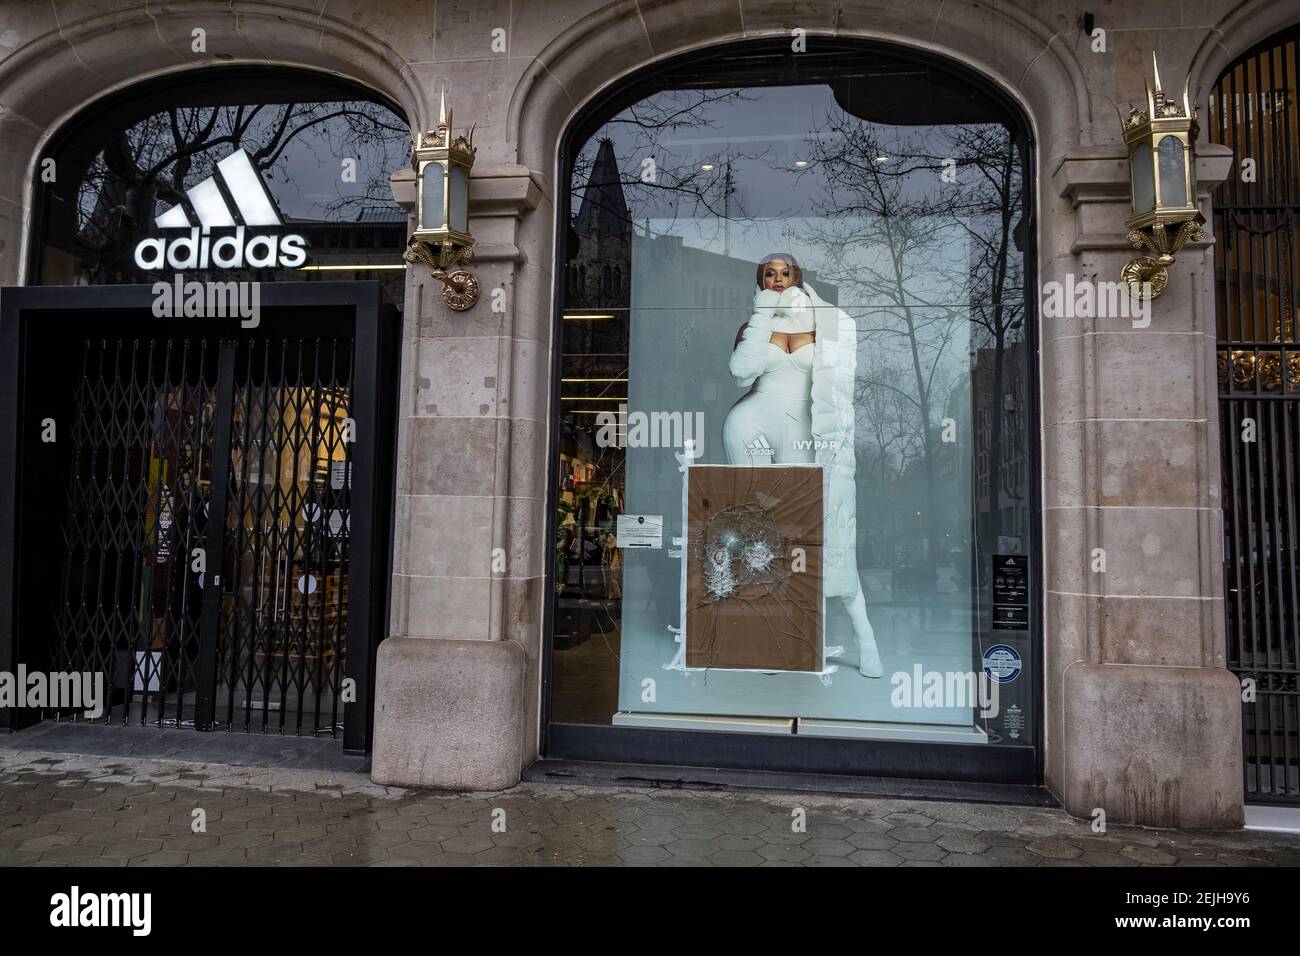 The Adidas store in Passeig de Gràcia is seen with a damage to its  window.More than 50 stores have suffered damage to their shop windows and  some have been looted on Passeig